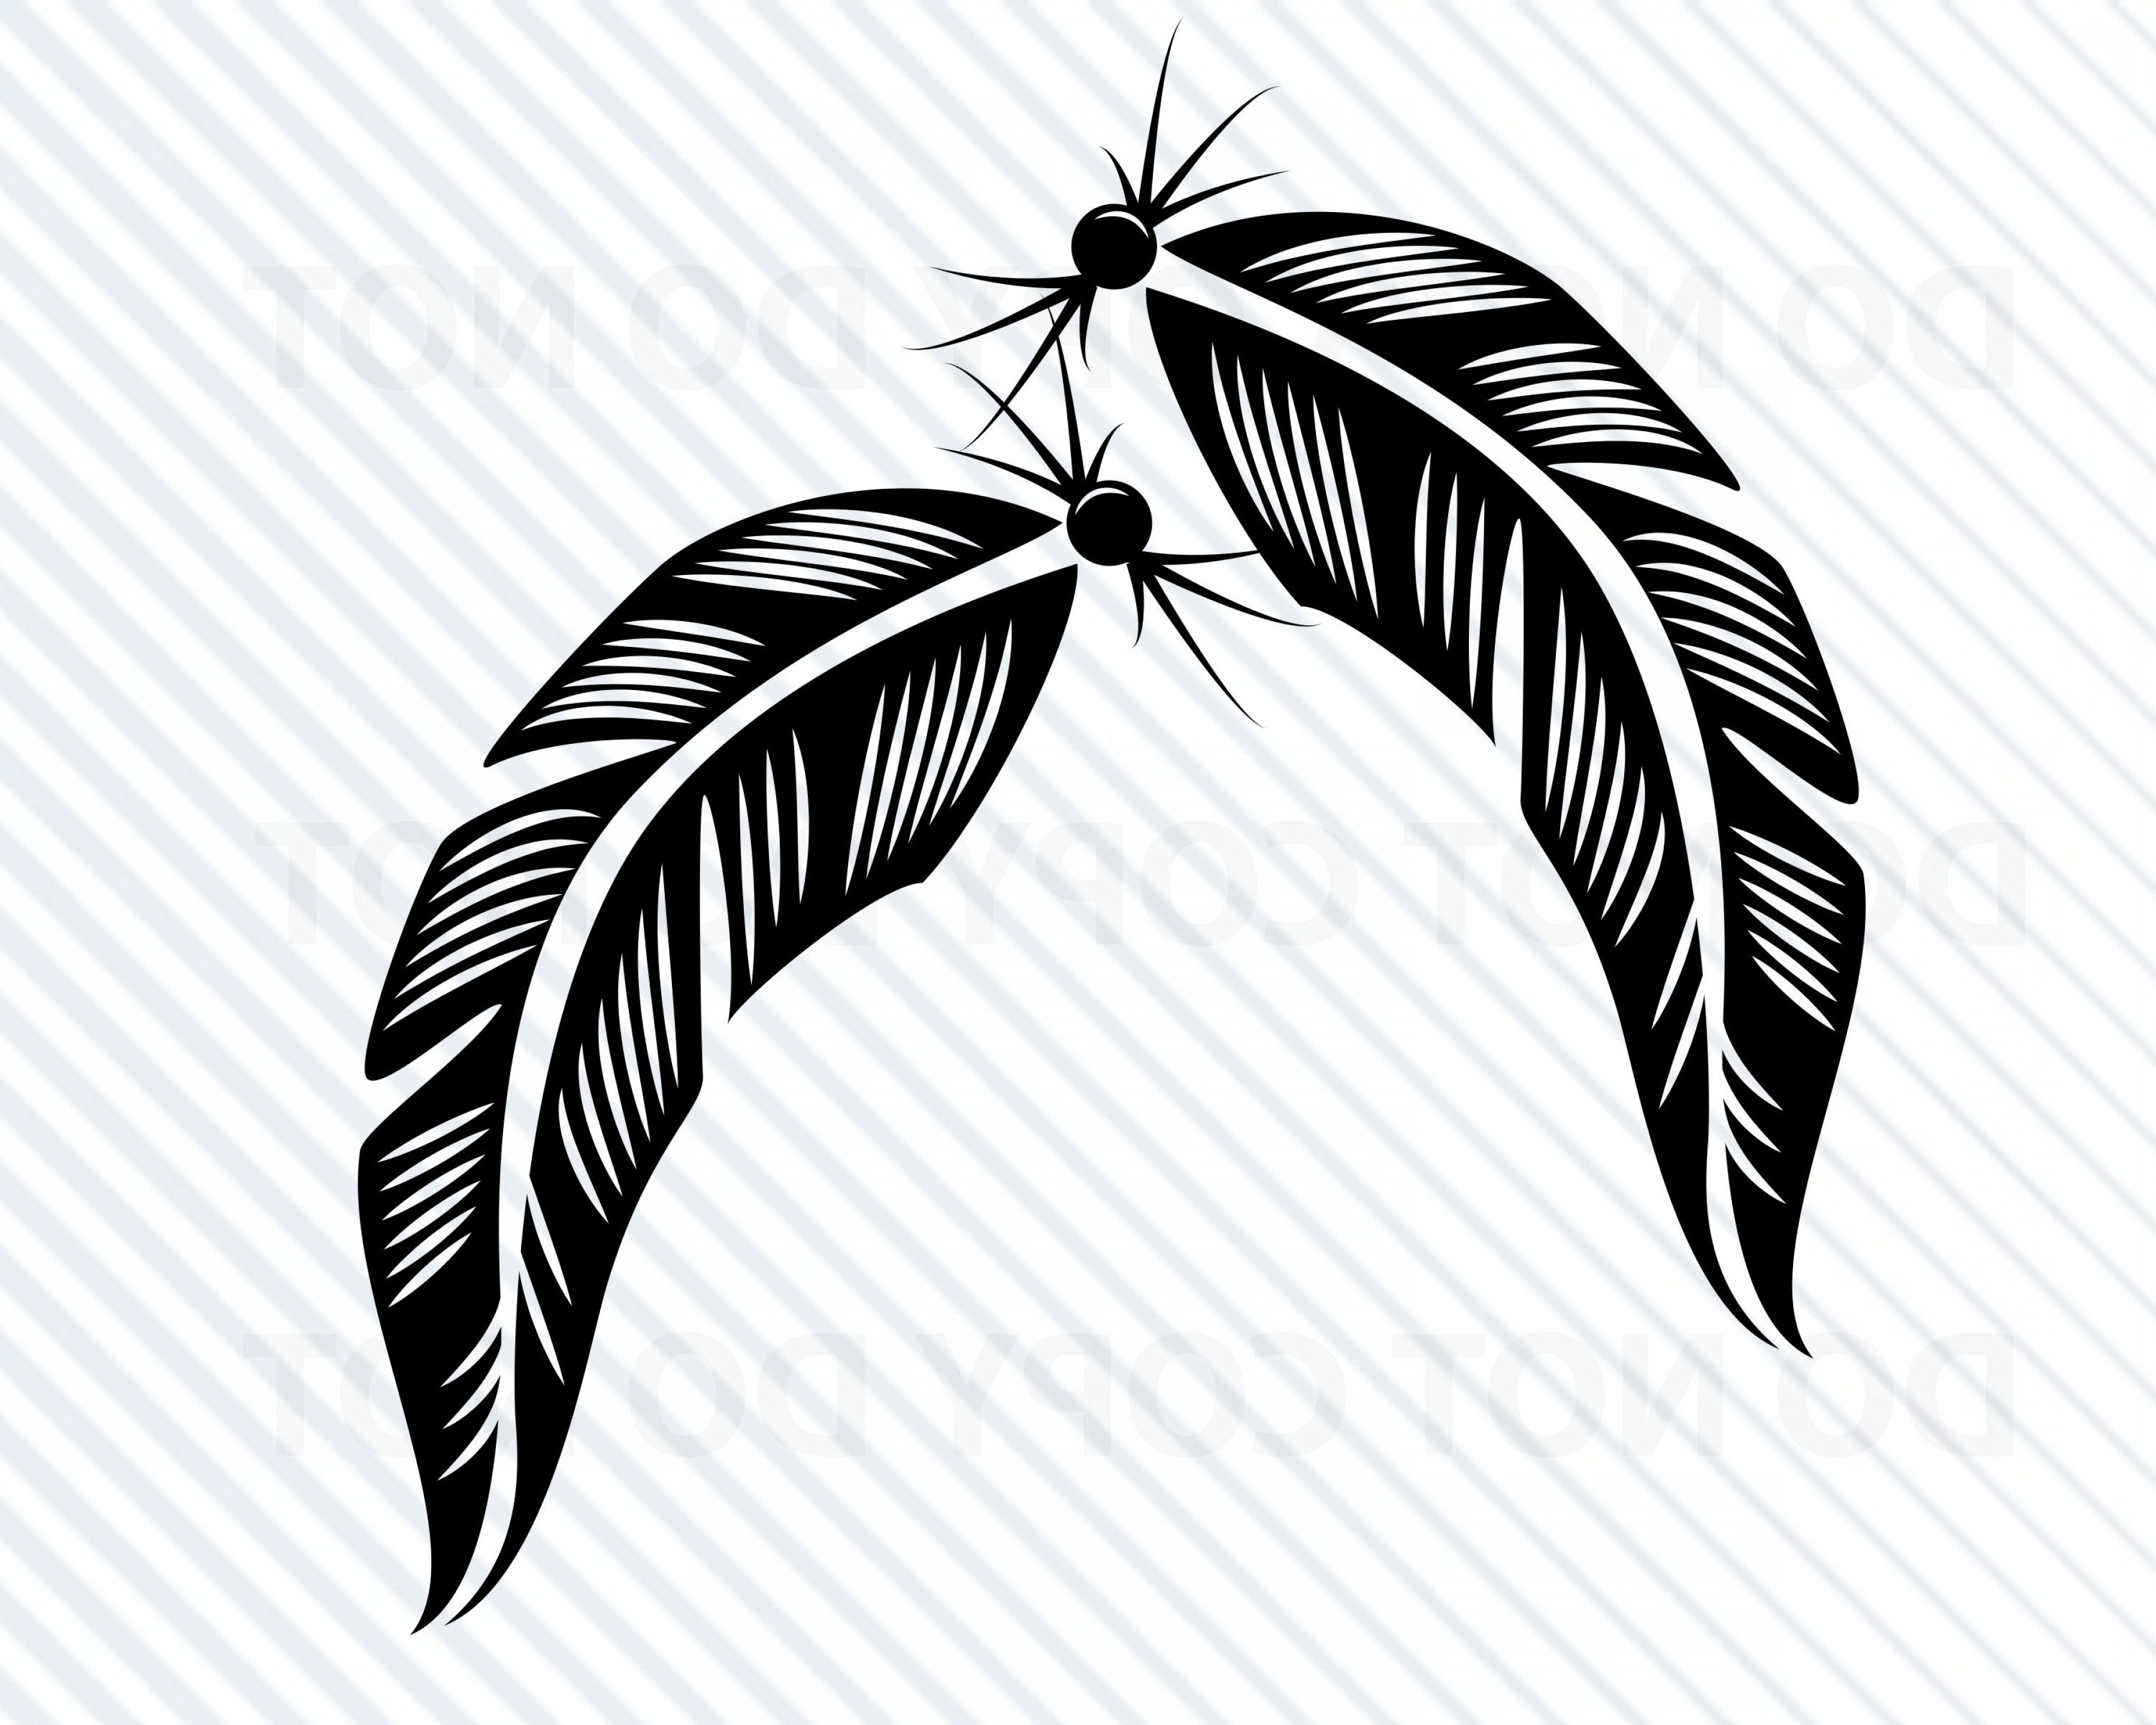 Download Arrow Feather Vector at Vectorified.com | Collection of ...